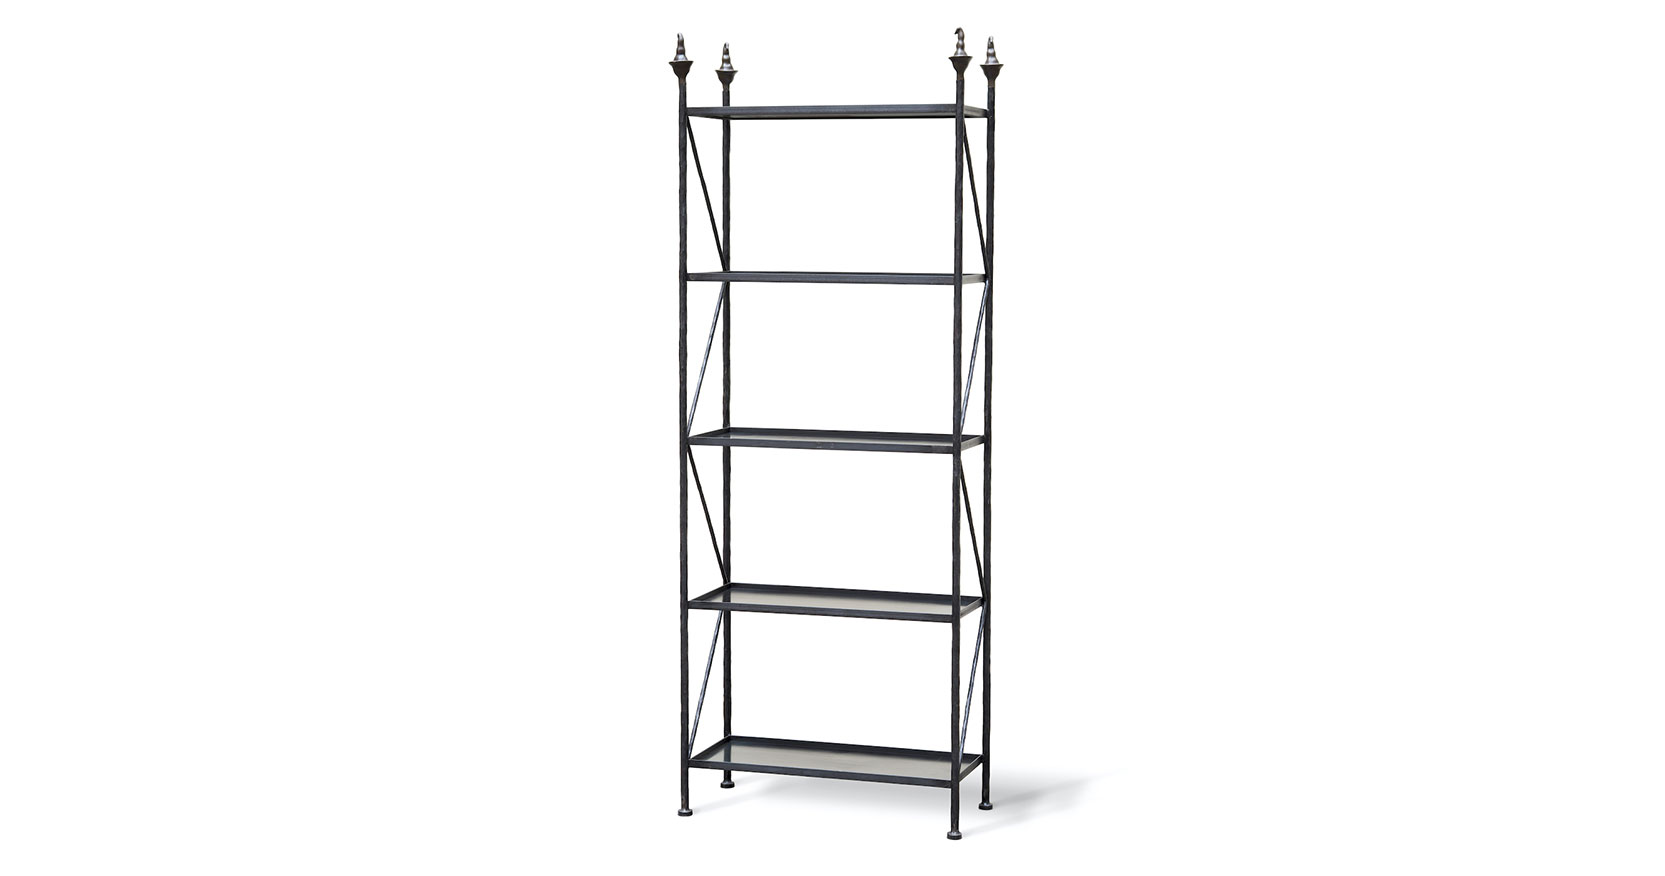 Garouste Bonetti, minimalist high shelves, with 5 dark brown metal shelves, surrounded by 4 black wrought iron rods that end at the top with bronze ornaments